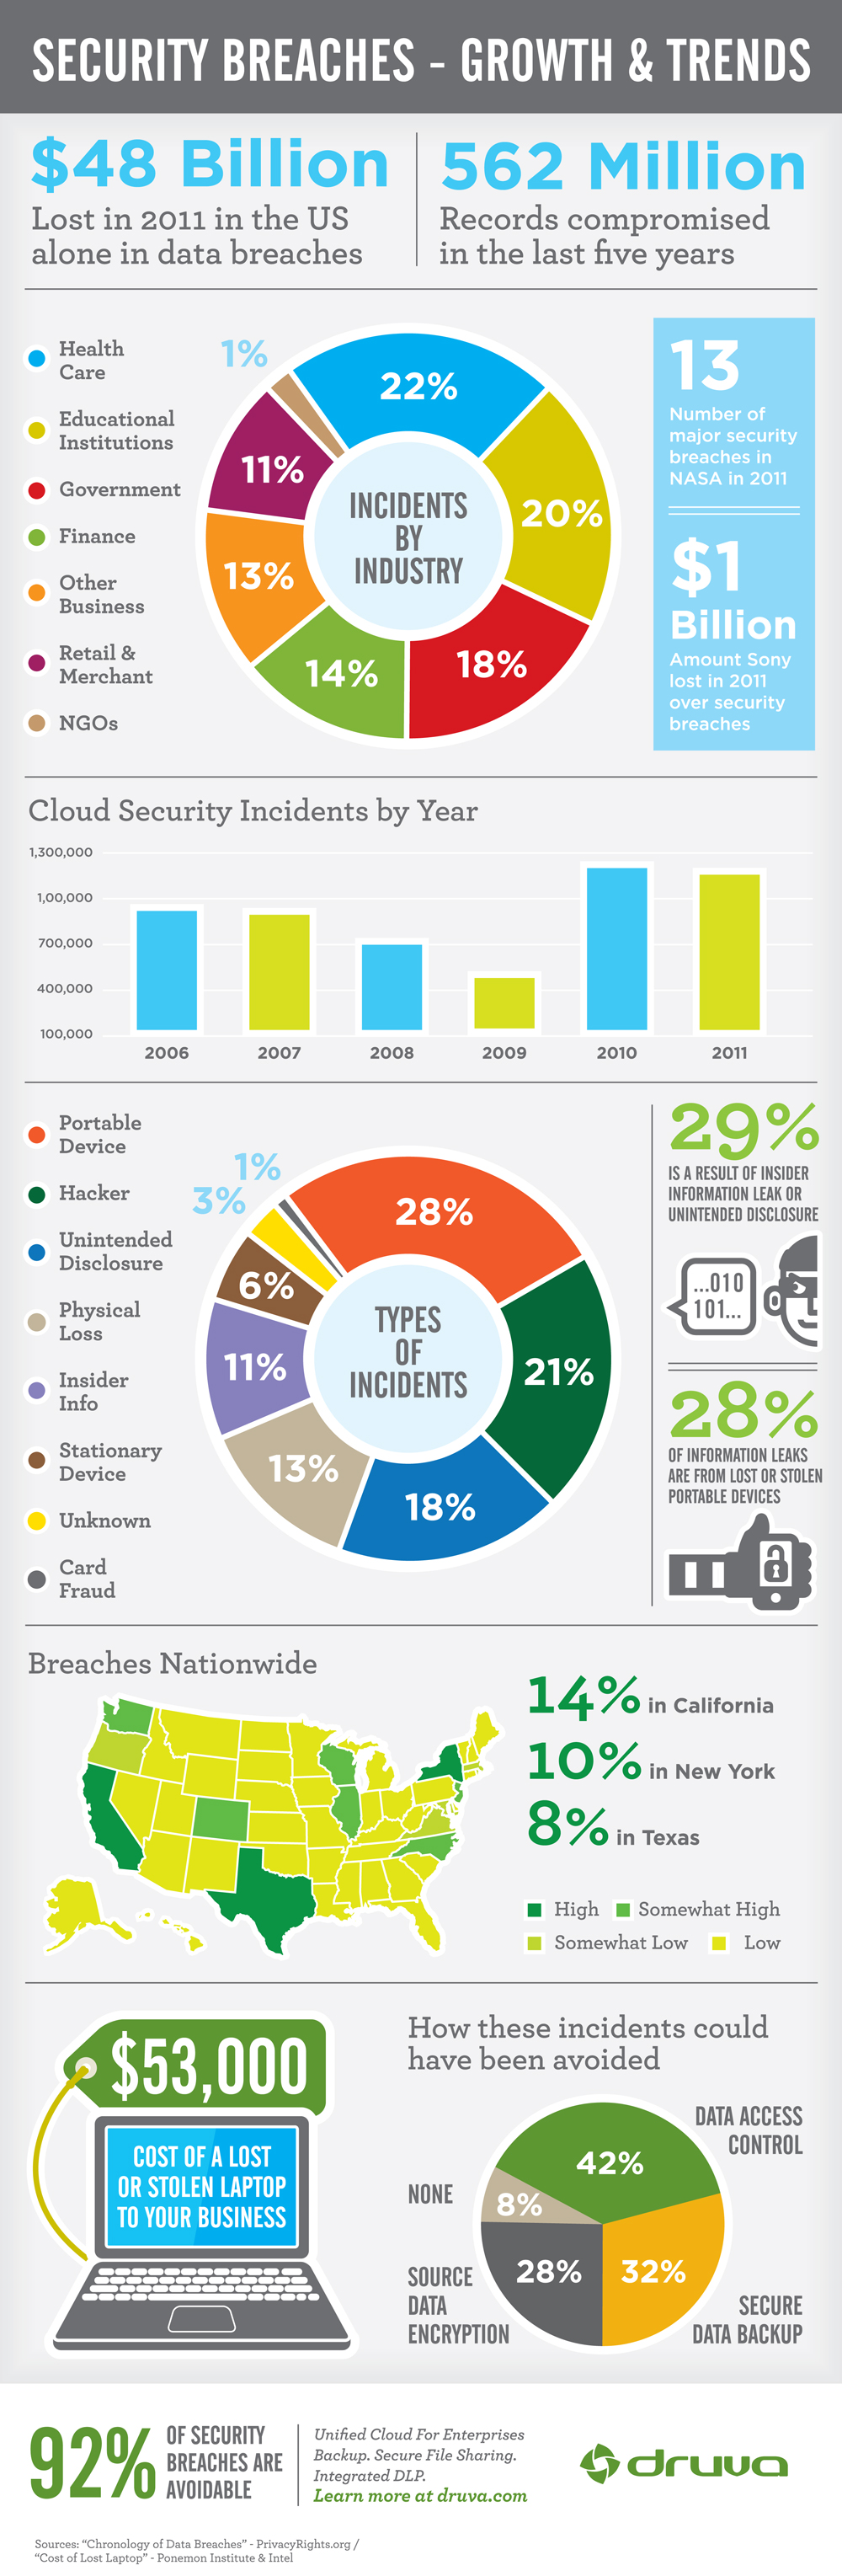 US Businesses Lost $48 Billion in Data Breaches in 2011 – Infographic